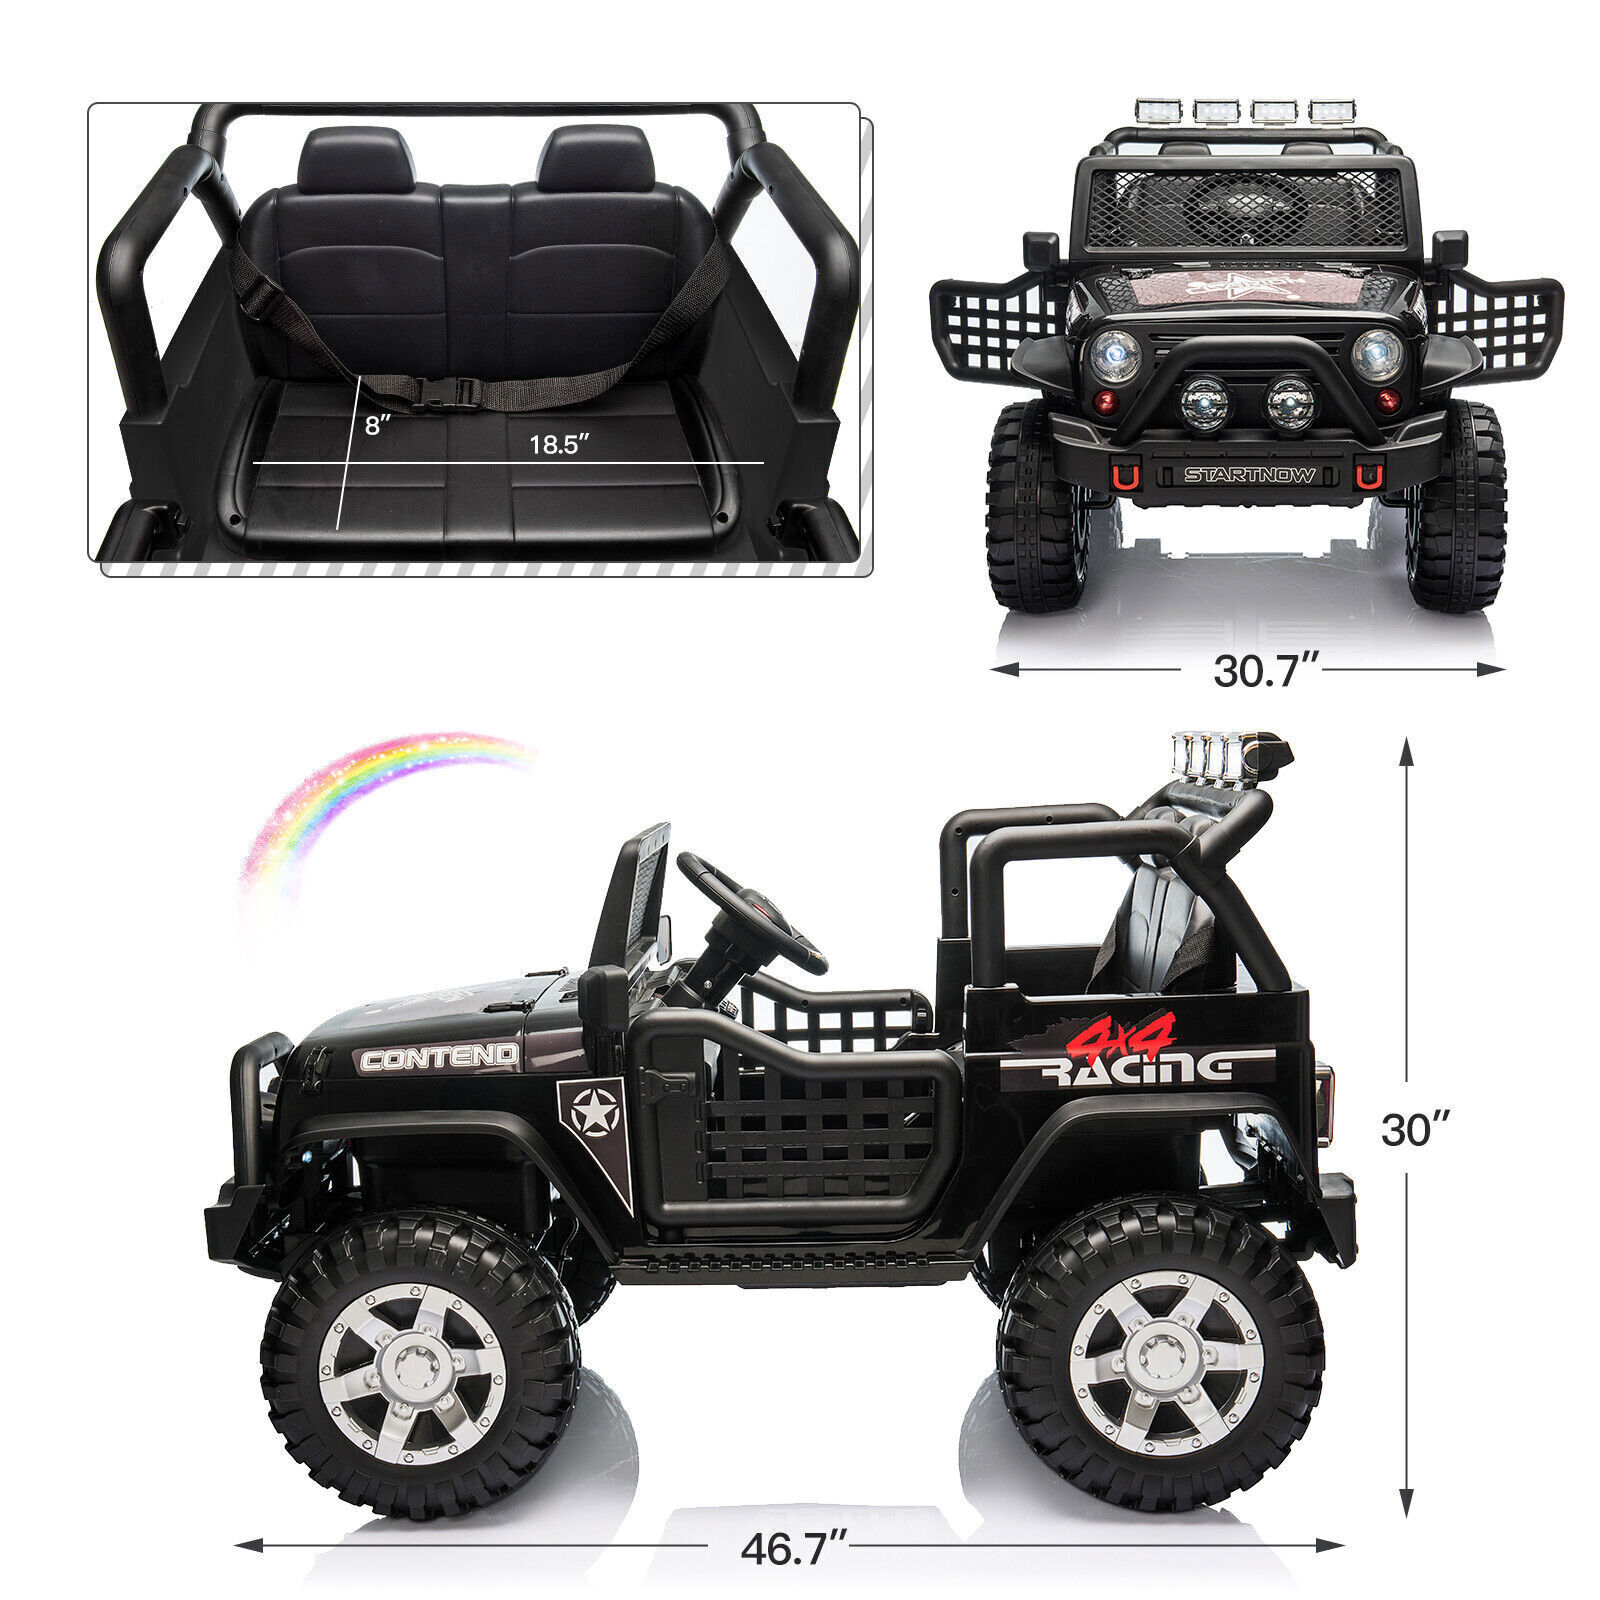 Dazone 12V Kids Ride on Jeep Car, Electric 2 Seats Off-road Jeep Ride on Truck Vehicle with Remote Control, LED Lights, MP3 Music, Black - image 4 of 8